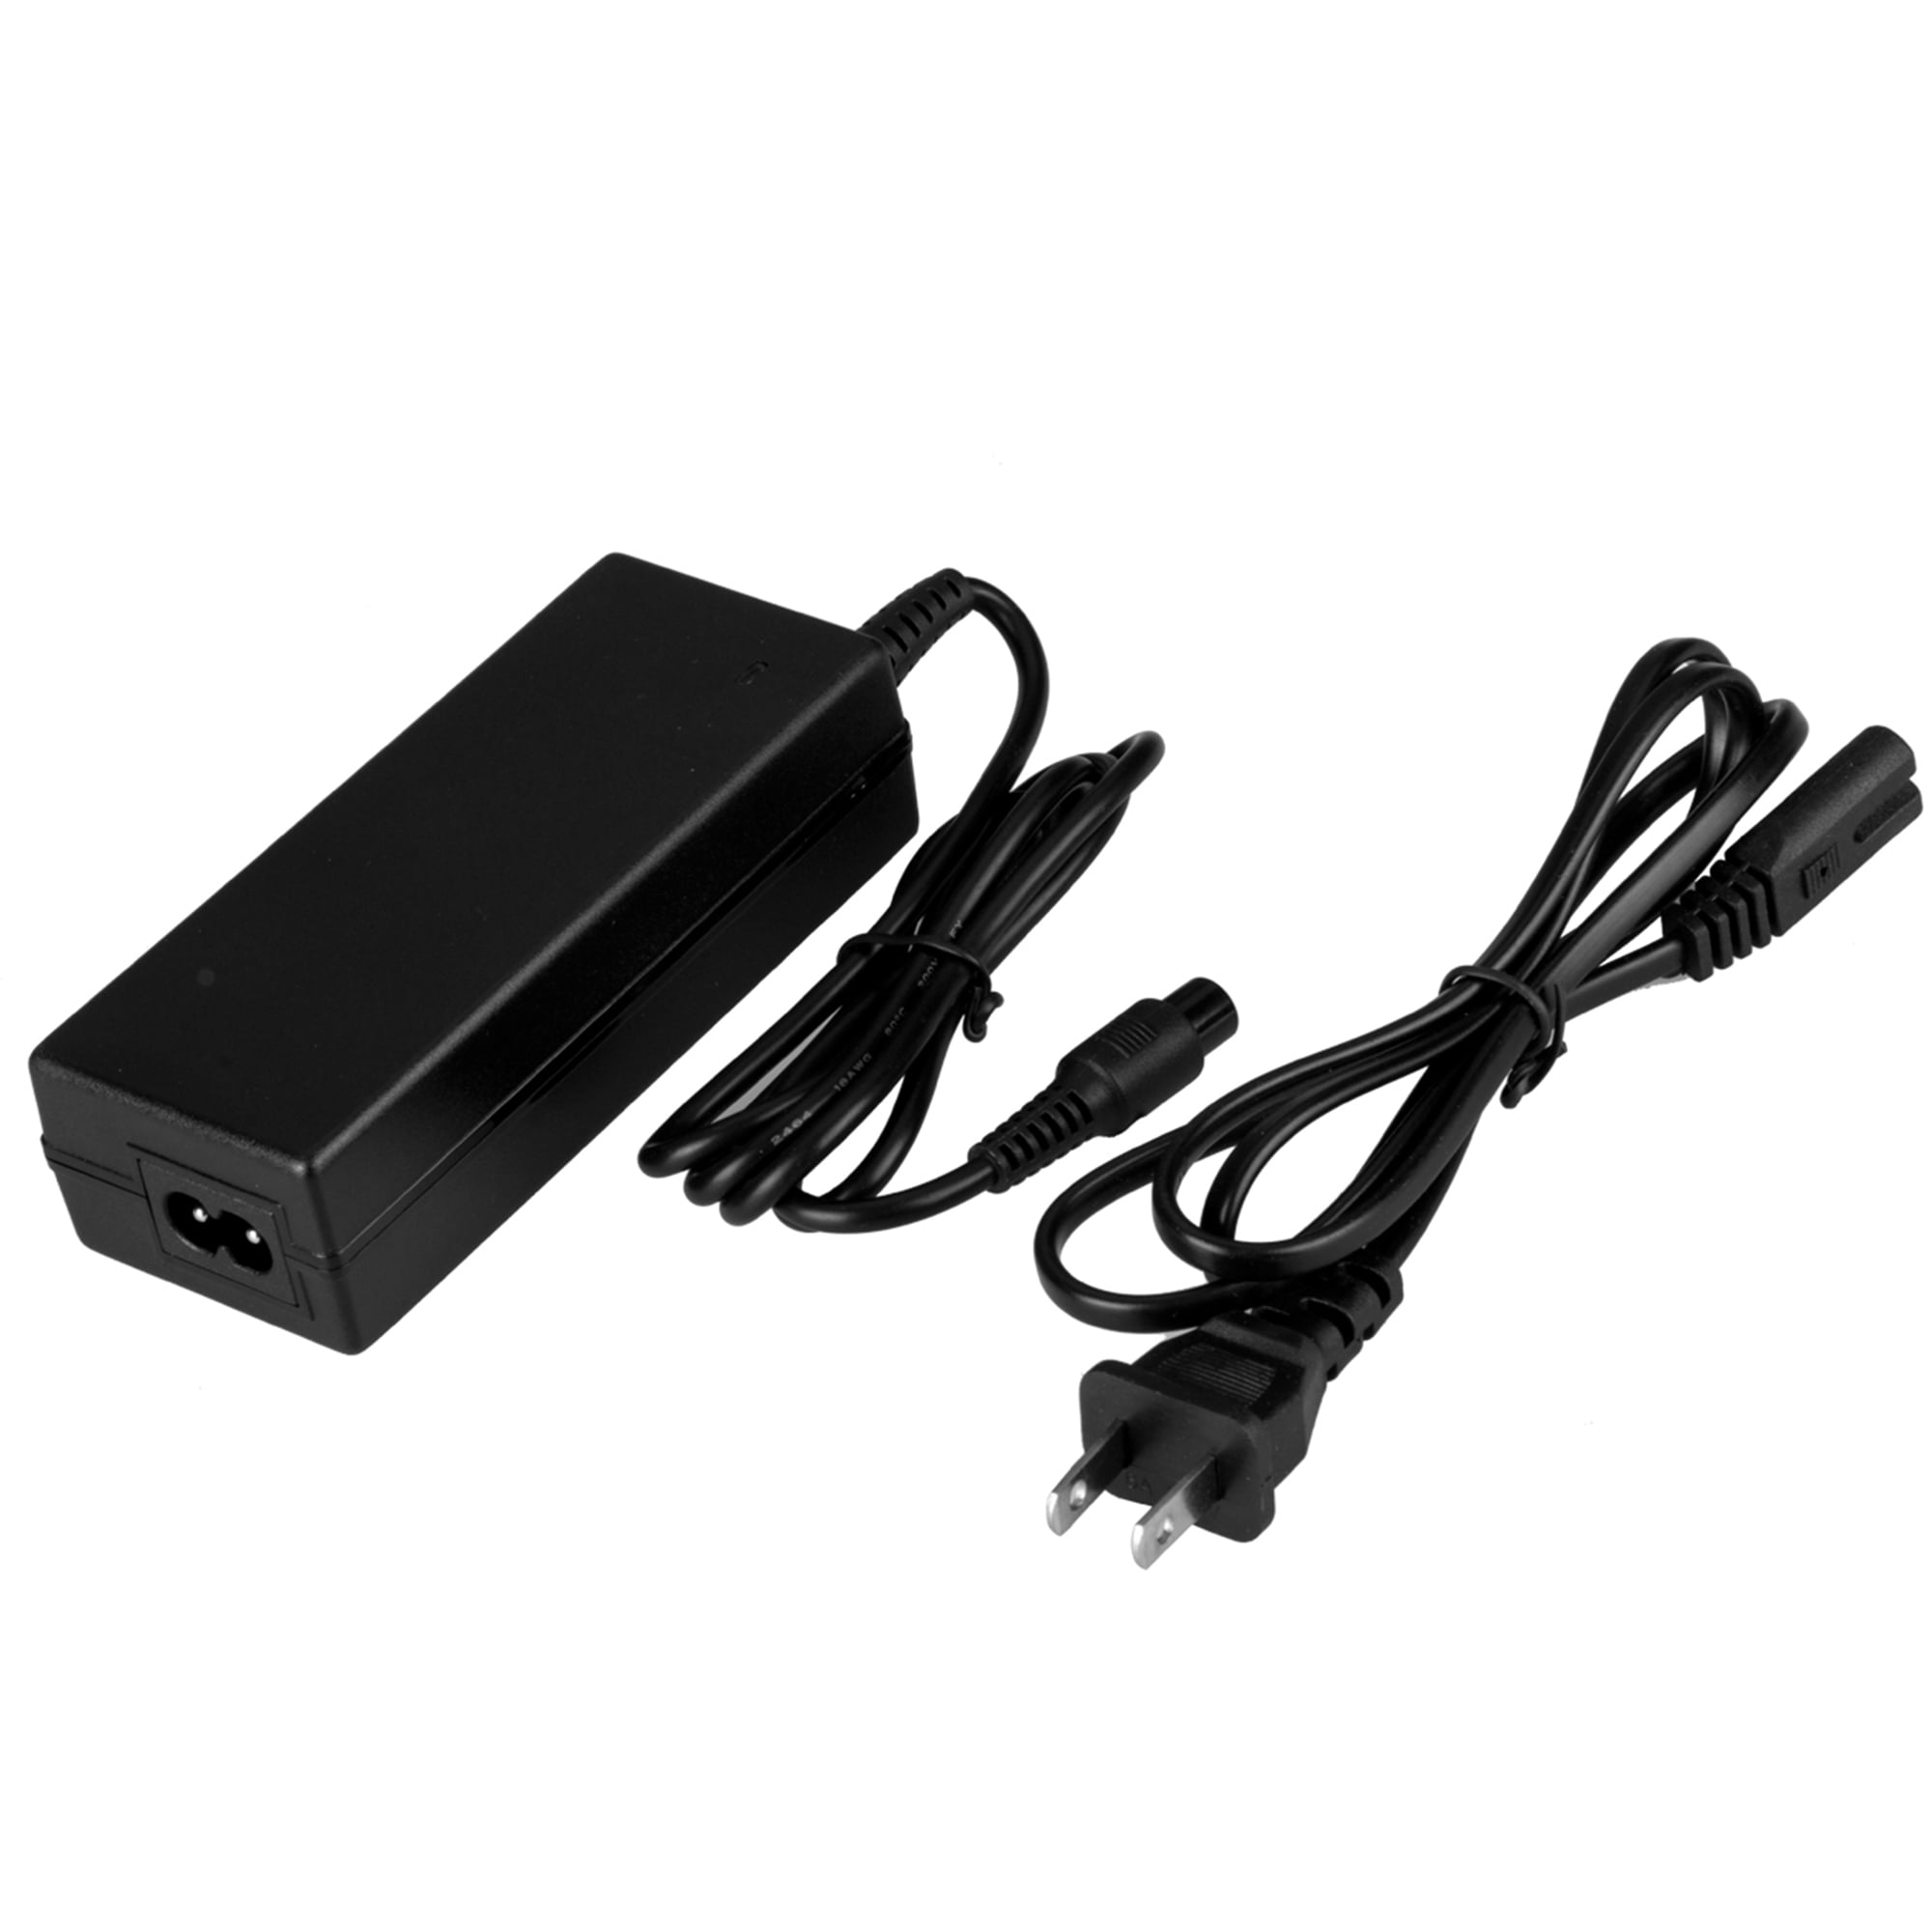 Power Adapter Battery Charger 42V For Smart Balance Hoverboard Electric Scooter. 